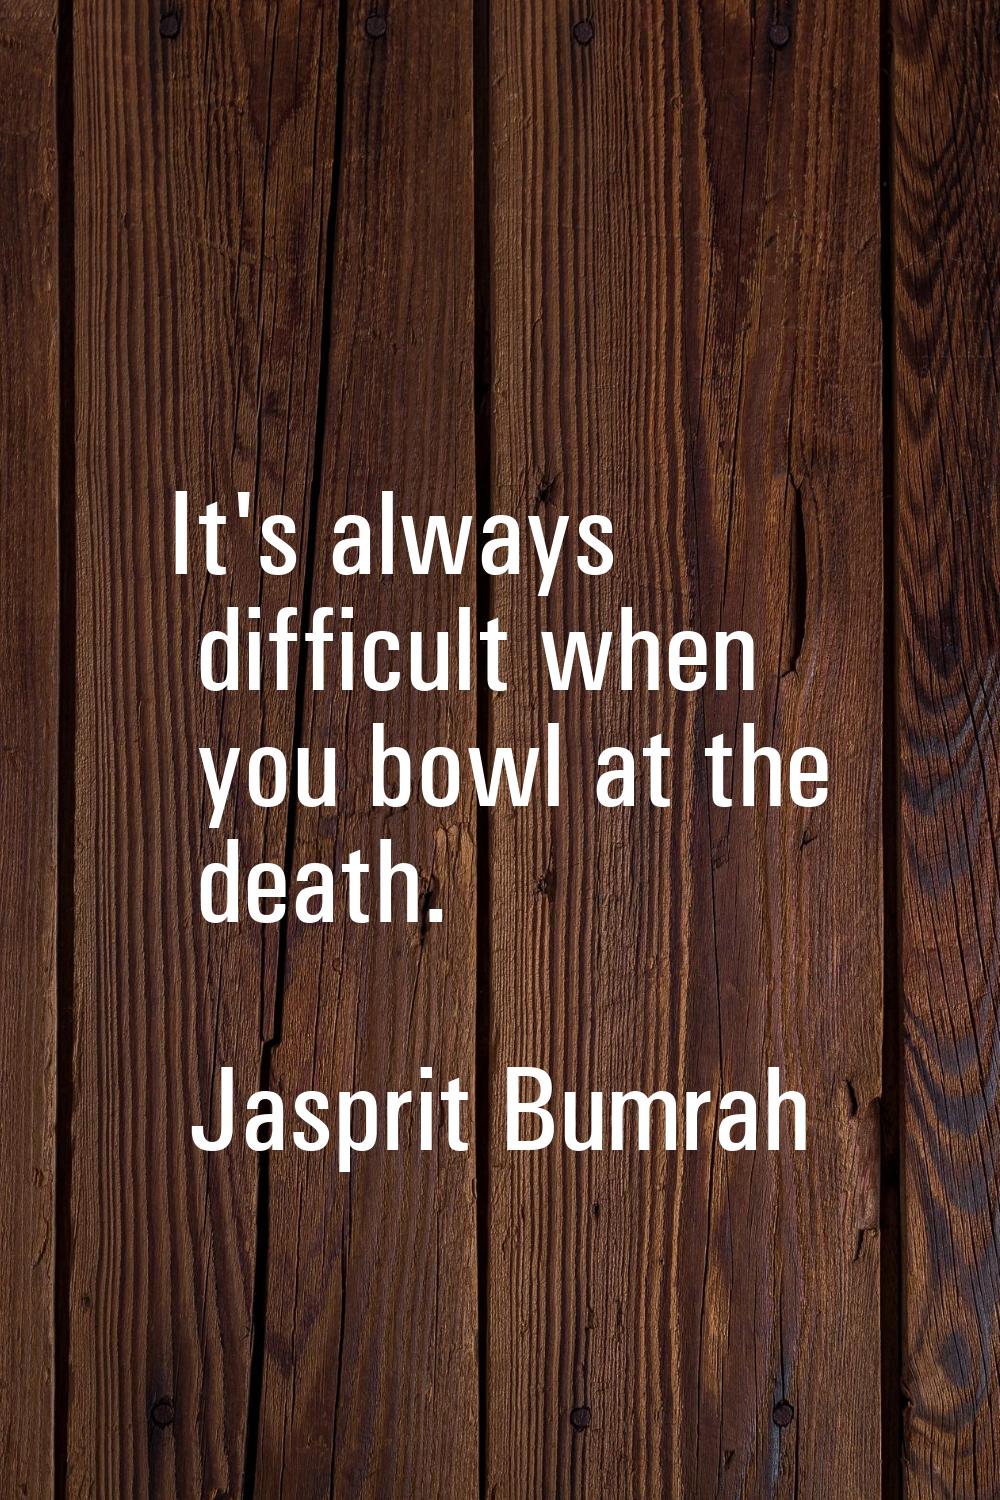 It's always difficult when you bowl at the death.